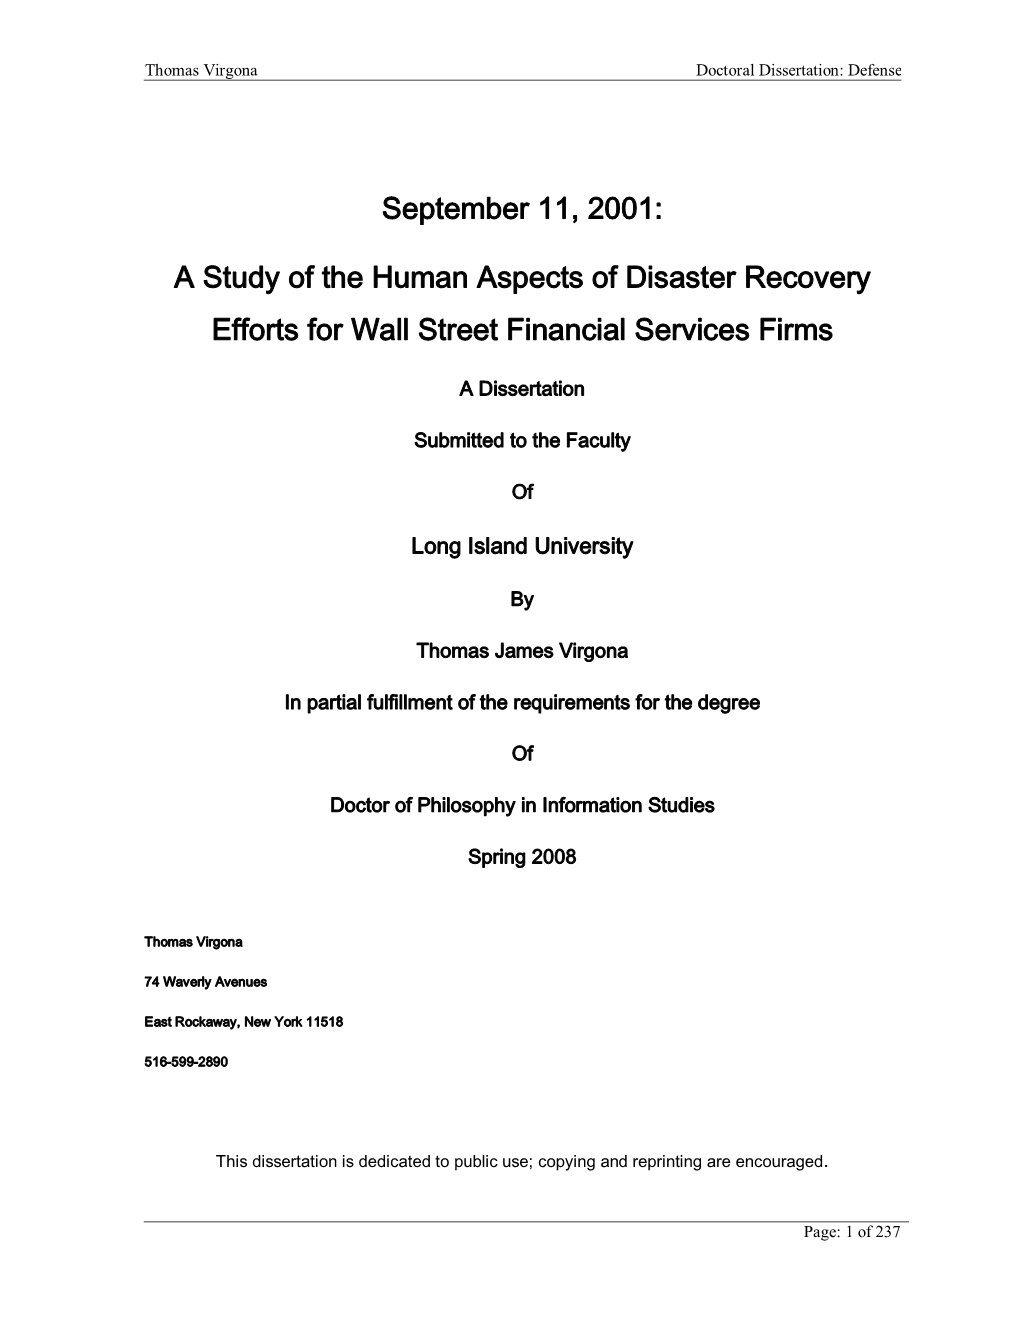 September 11, 2001: a Study of the Human Aspects of Disaster Recovery Efforts for Wall Street Financial Services Firms